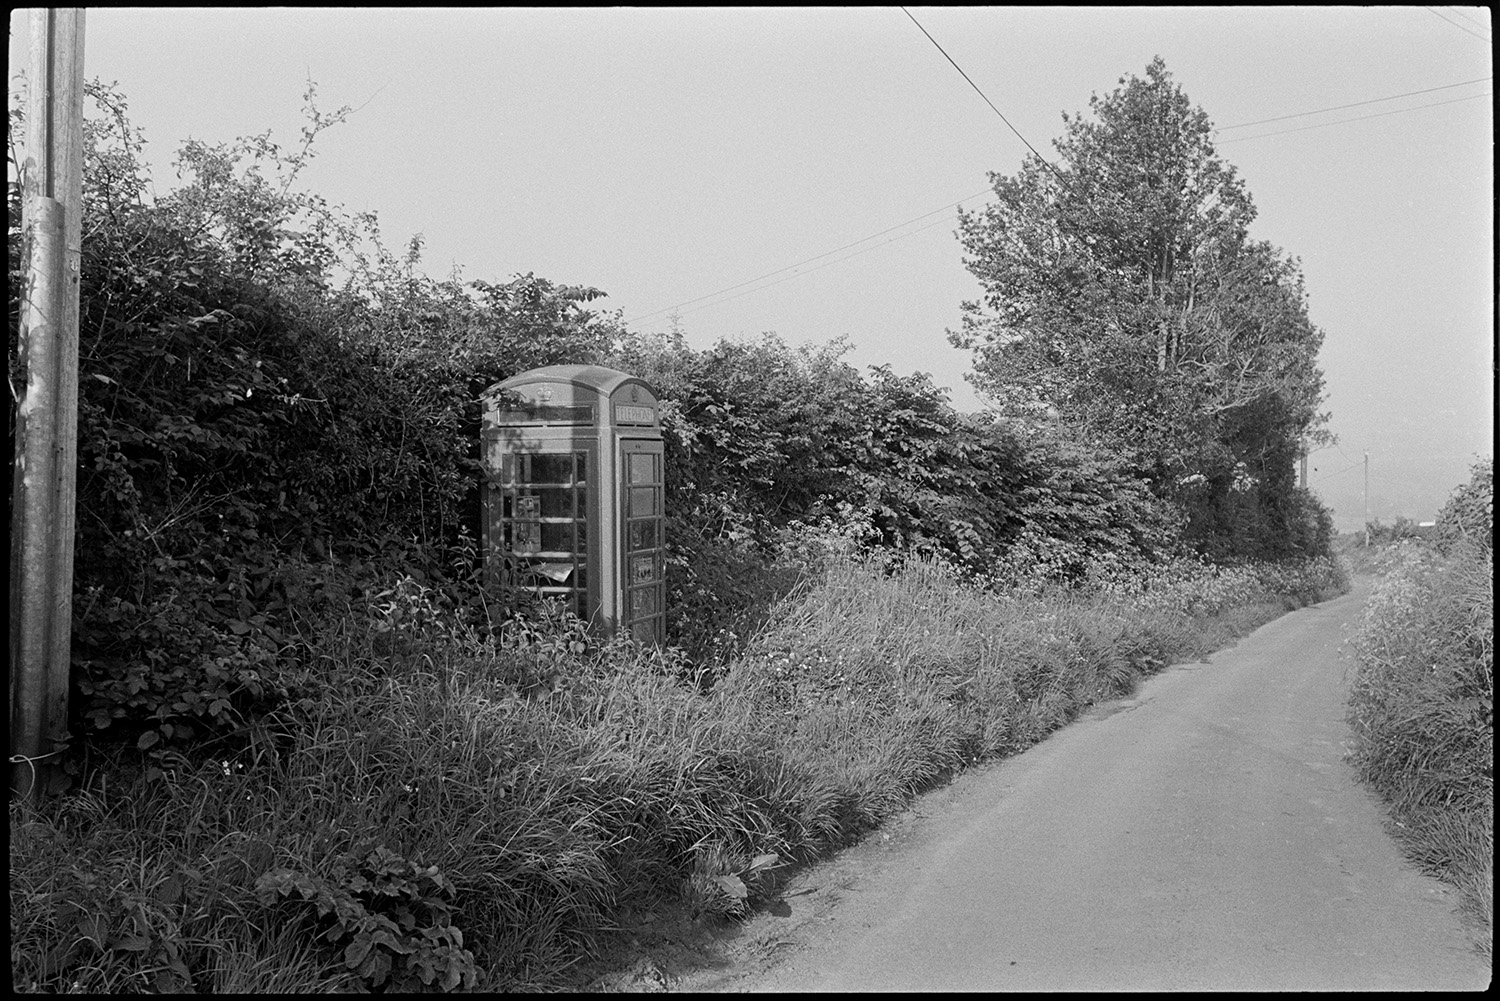 Telephone kiosk in overgrown hedge.
[A telephone box in a very overgrown verge next to a hedge by the side of a lane near Mary Week, Chulmleigh.]